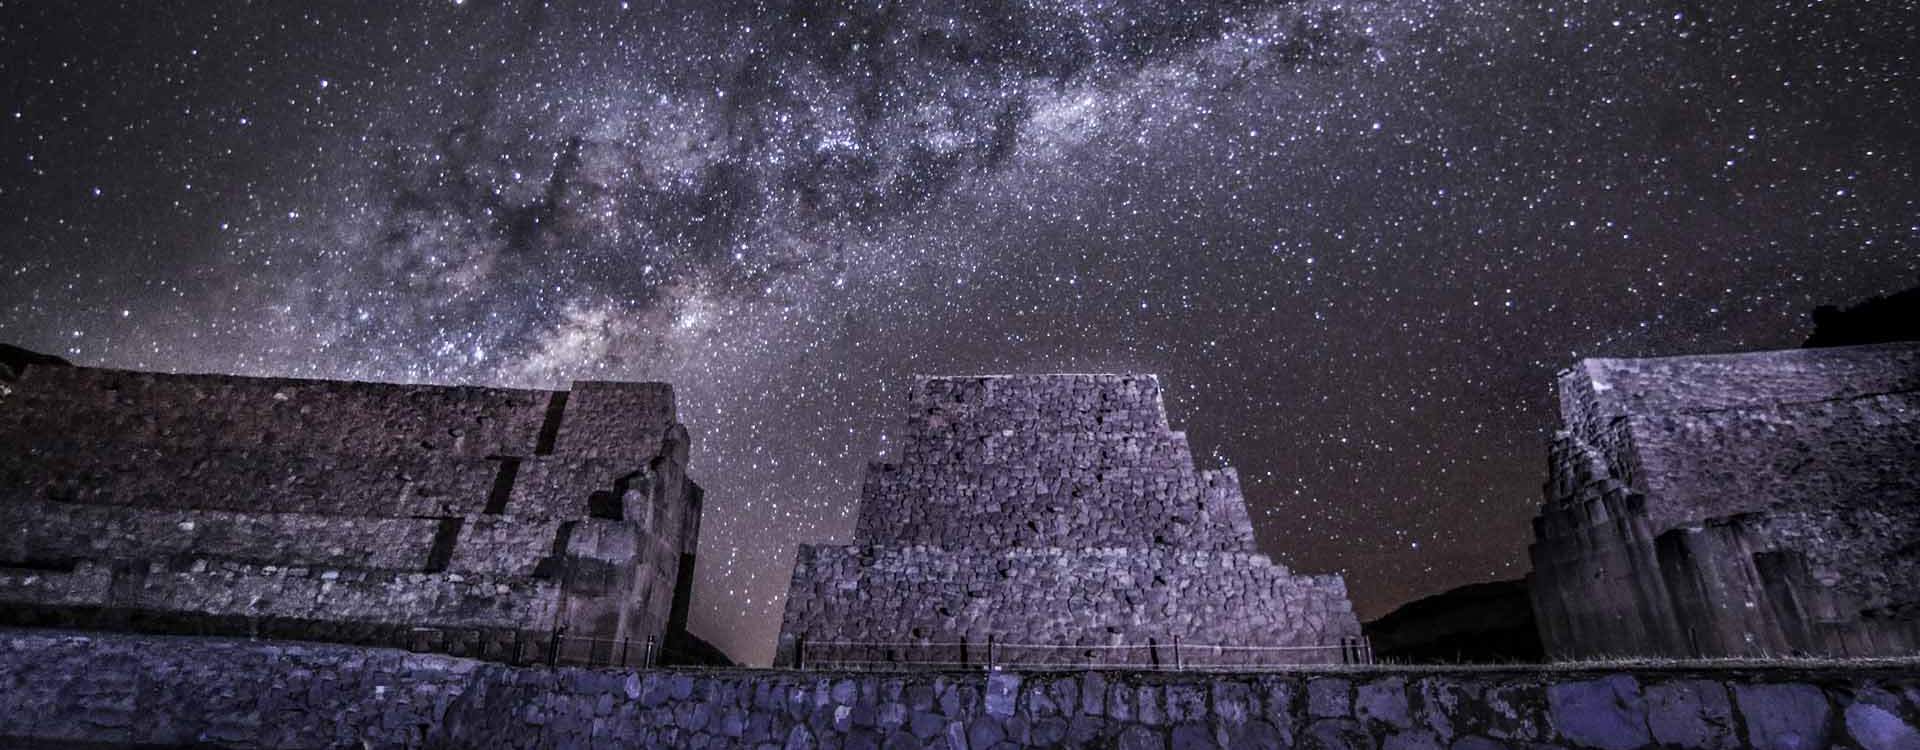 Astrophotography in the Sacred Valley of the Incas